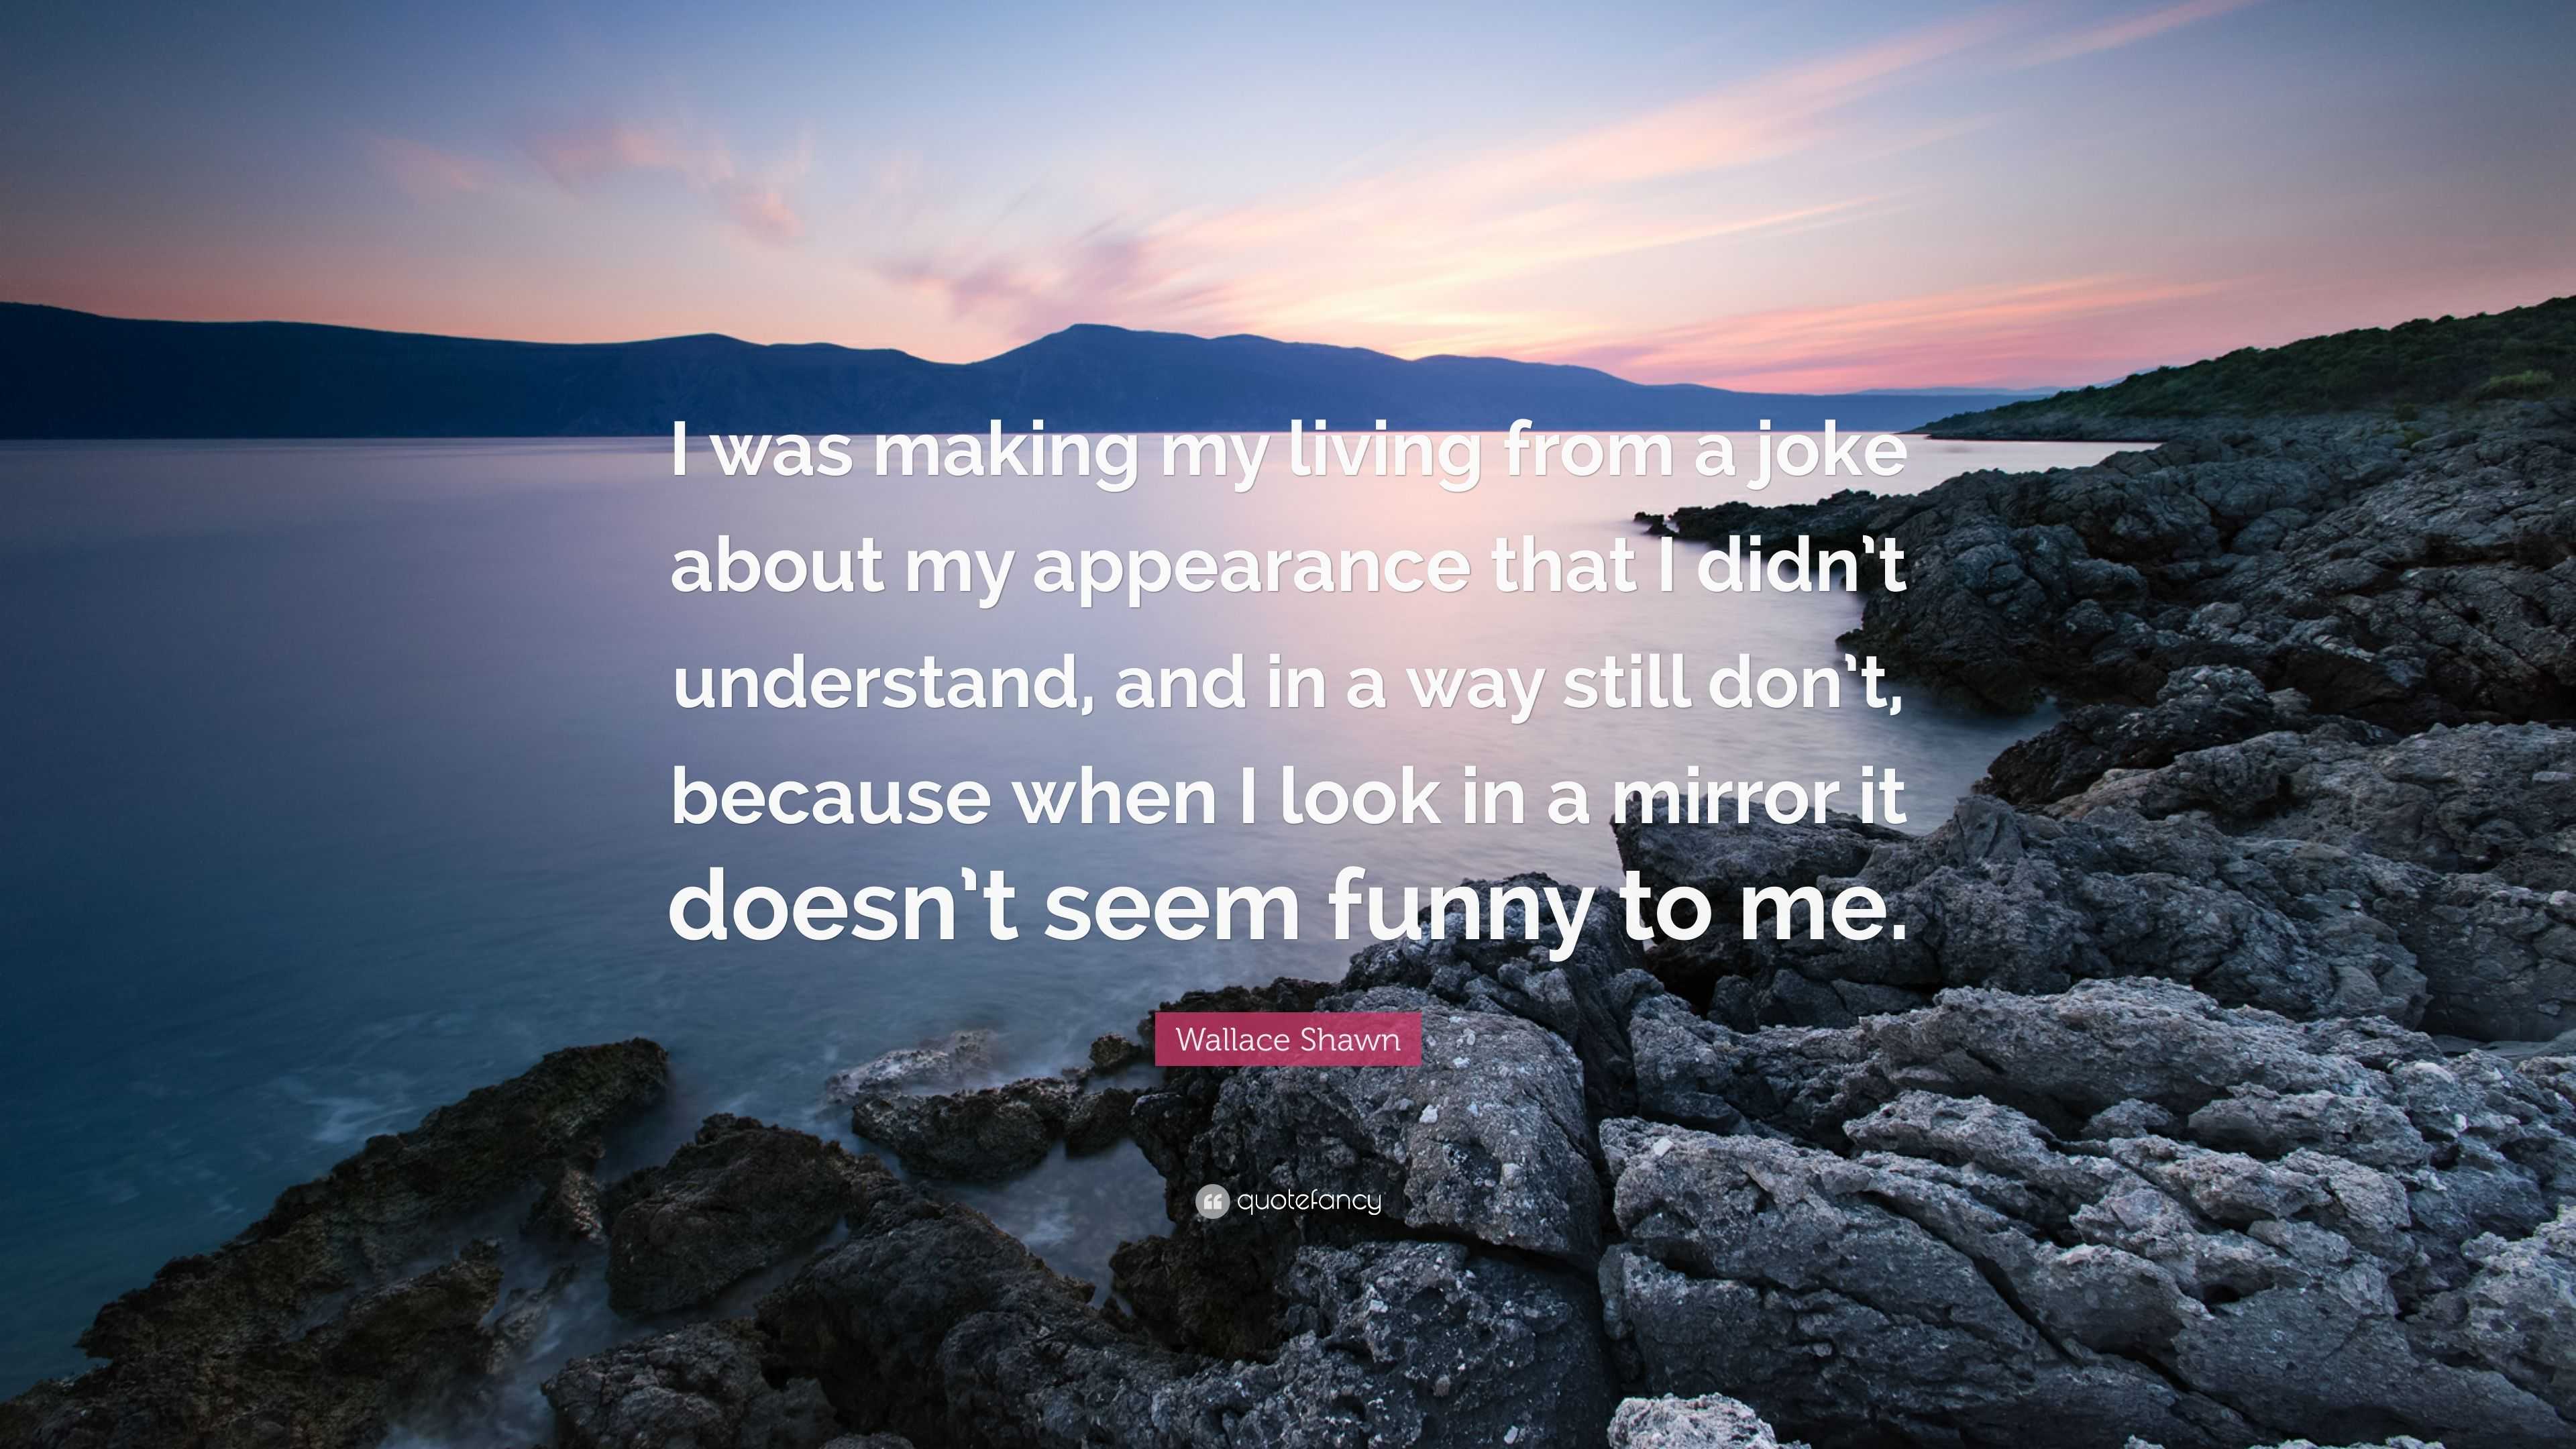 Wallace Shawn Quote: “I was making my living from a joke about my appearance  that I didn't understand, and in a way still don't, because when ...”